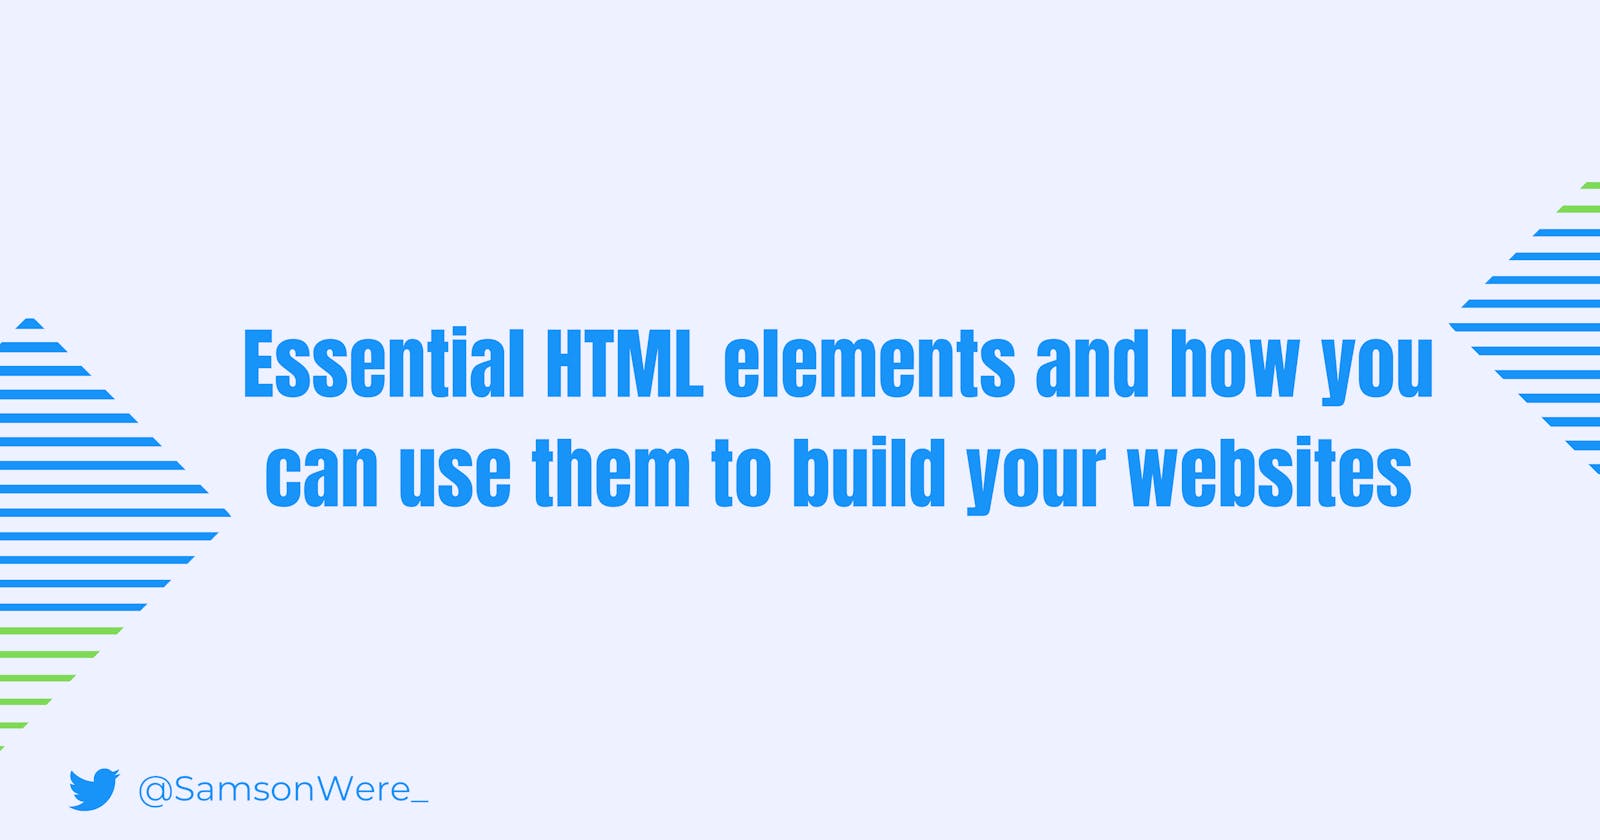 The essential HTML elements and how to use them to build your websites.